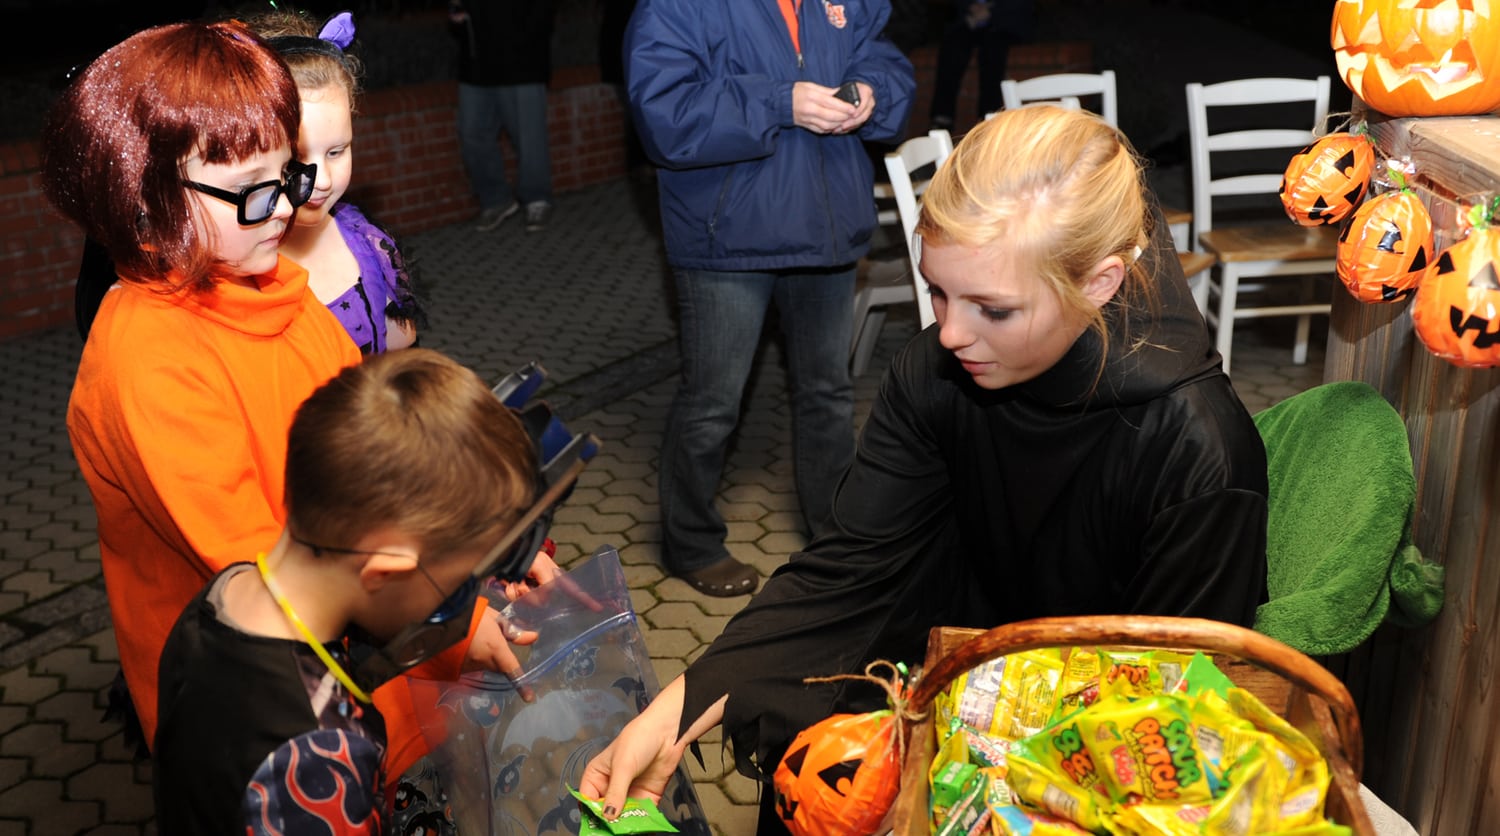 7 Ways to Stay Safe this Halloween